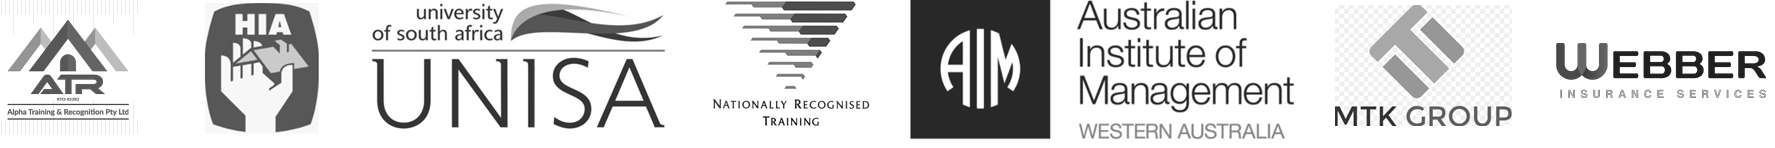 accreditation logos Home - WA Building Inspections Perth